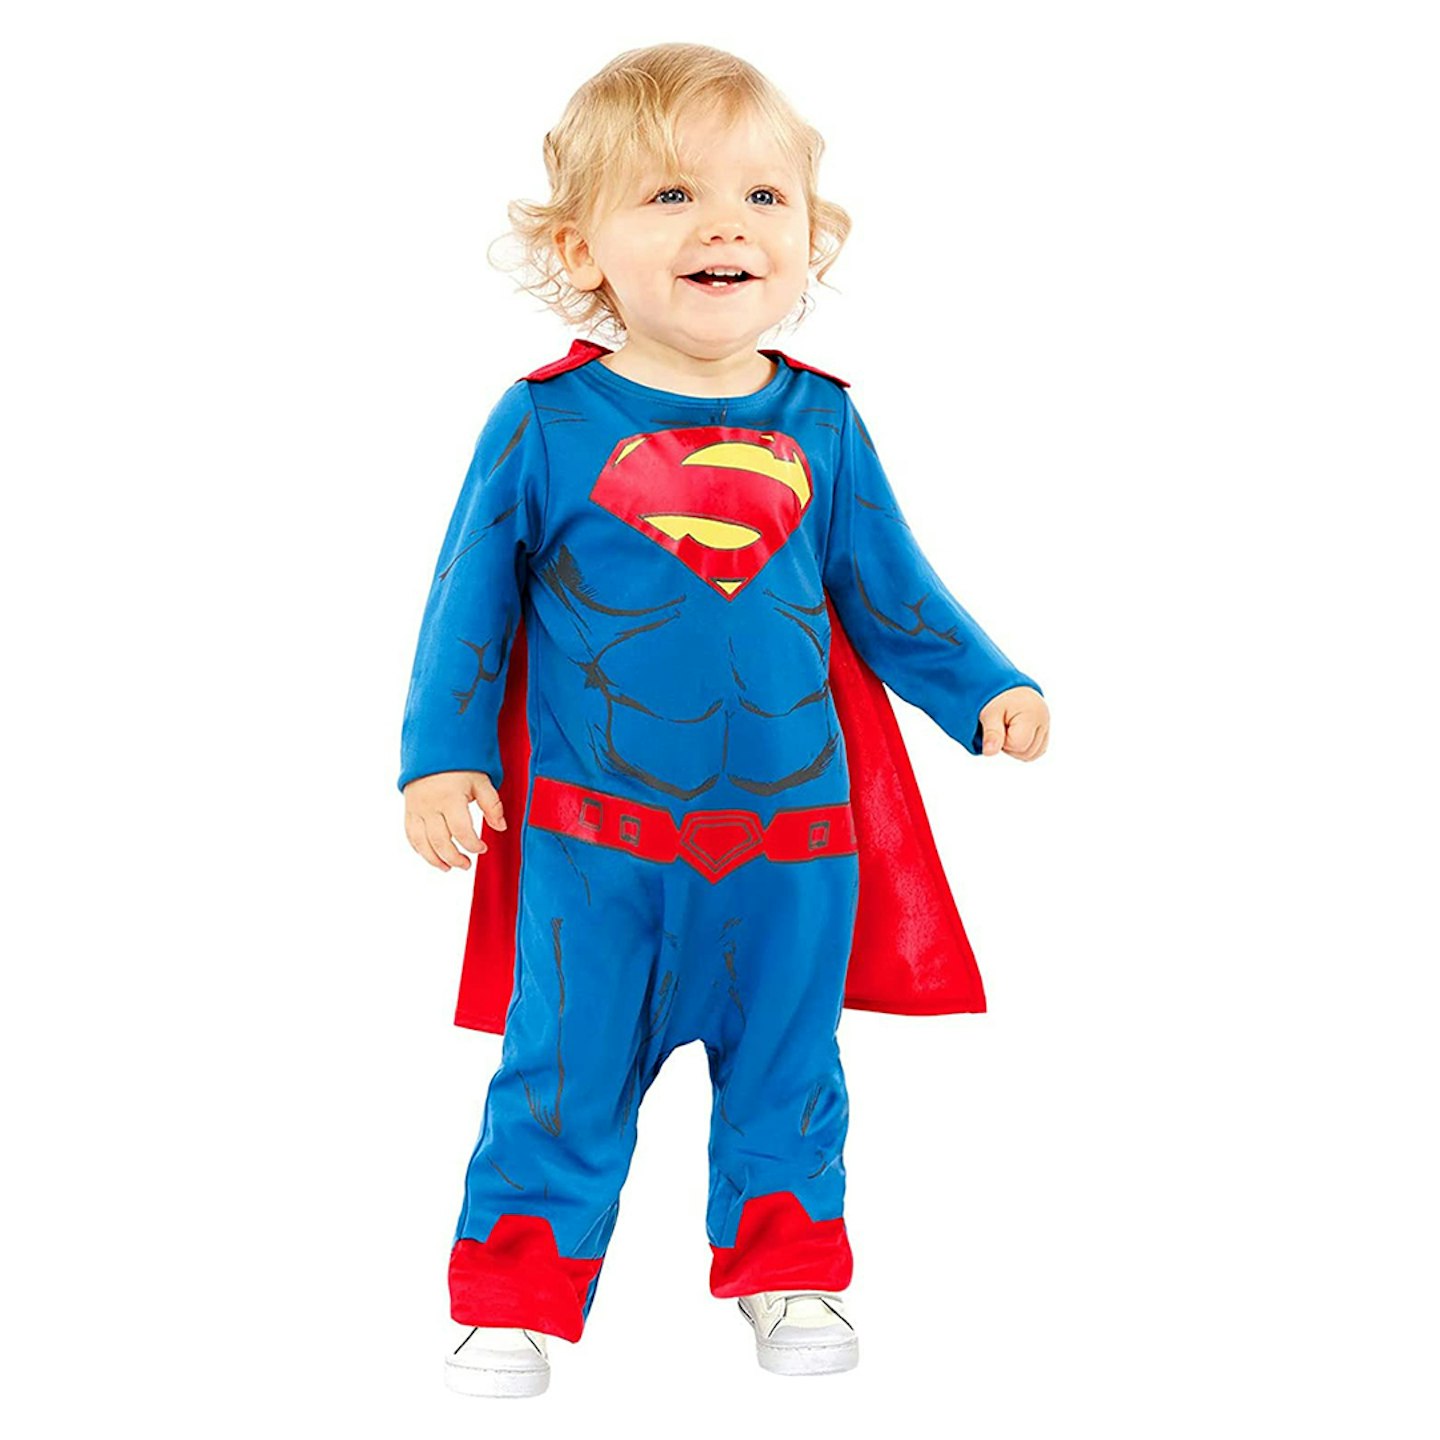 The Avengers Superhero Kids Fancy Dress Childrens Boys Childs Costume  Outfit New